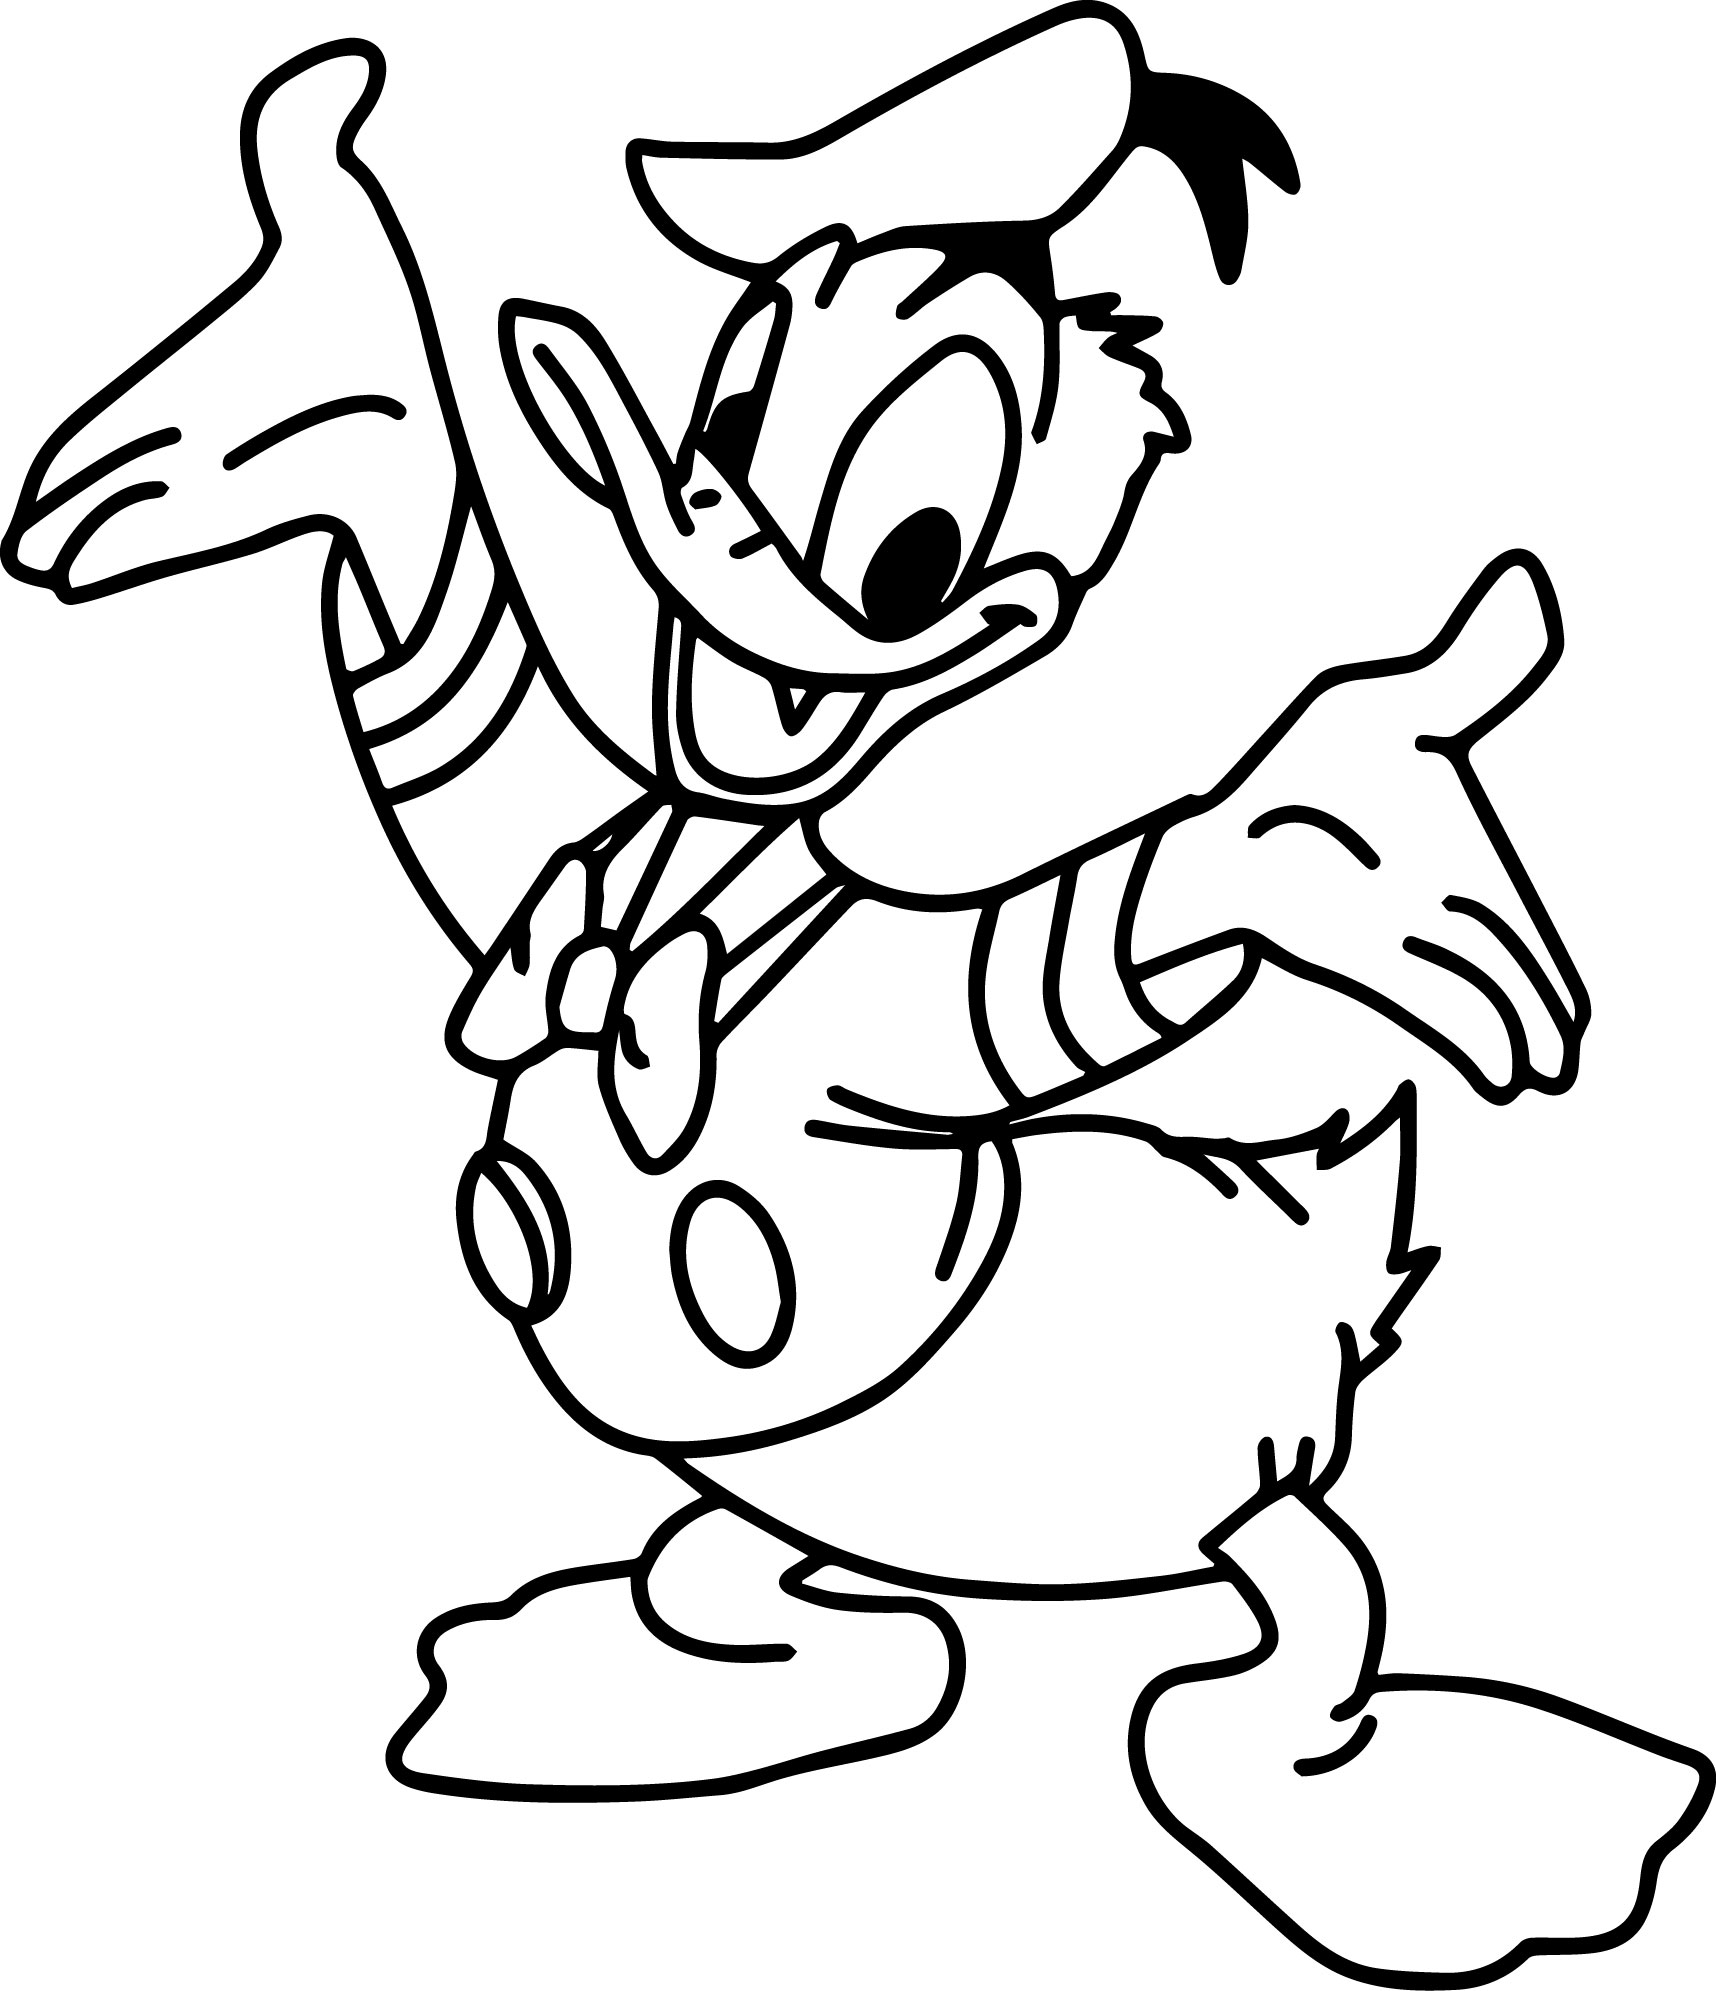 donald-duck-printable-coloring-pages-at-getdrawings-free-download